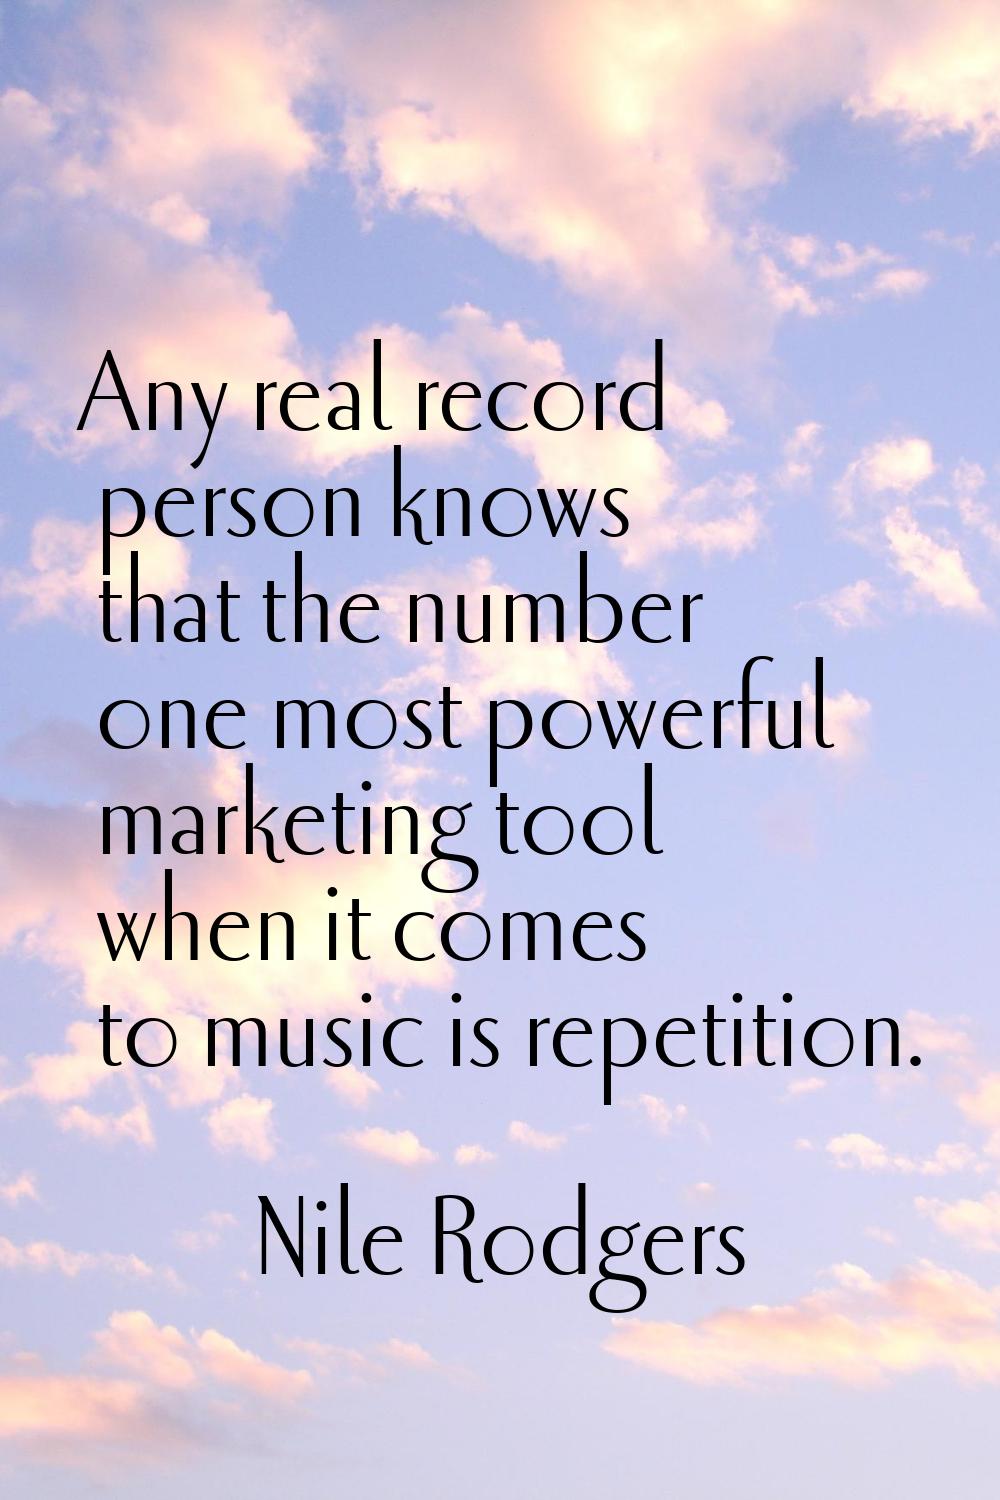 Any real record person knows that the number one most powerful marketing tool when it comes to musi